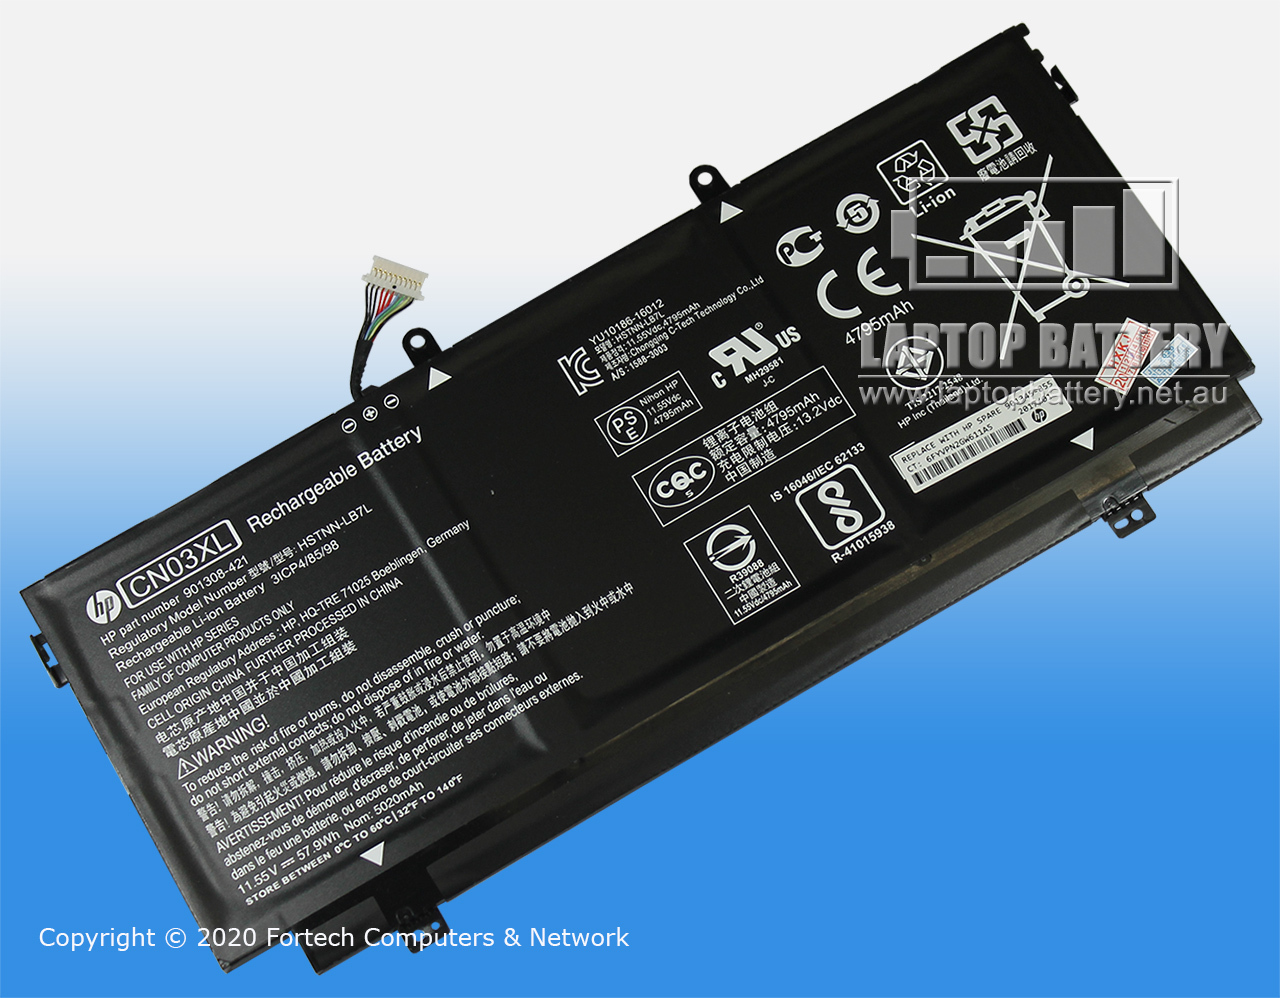 HP ENVY 13-AB000, SPECTRE 13-AC000 MAIN BATTERY 859356-855 CN03 - Click Image to Close